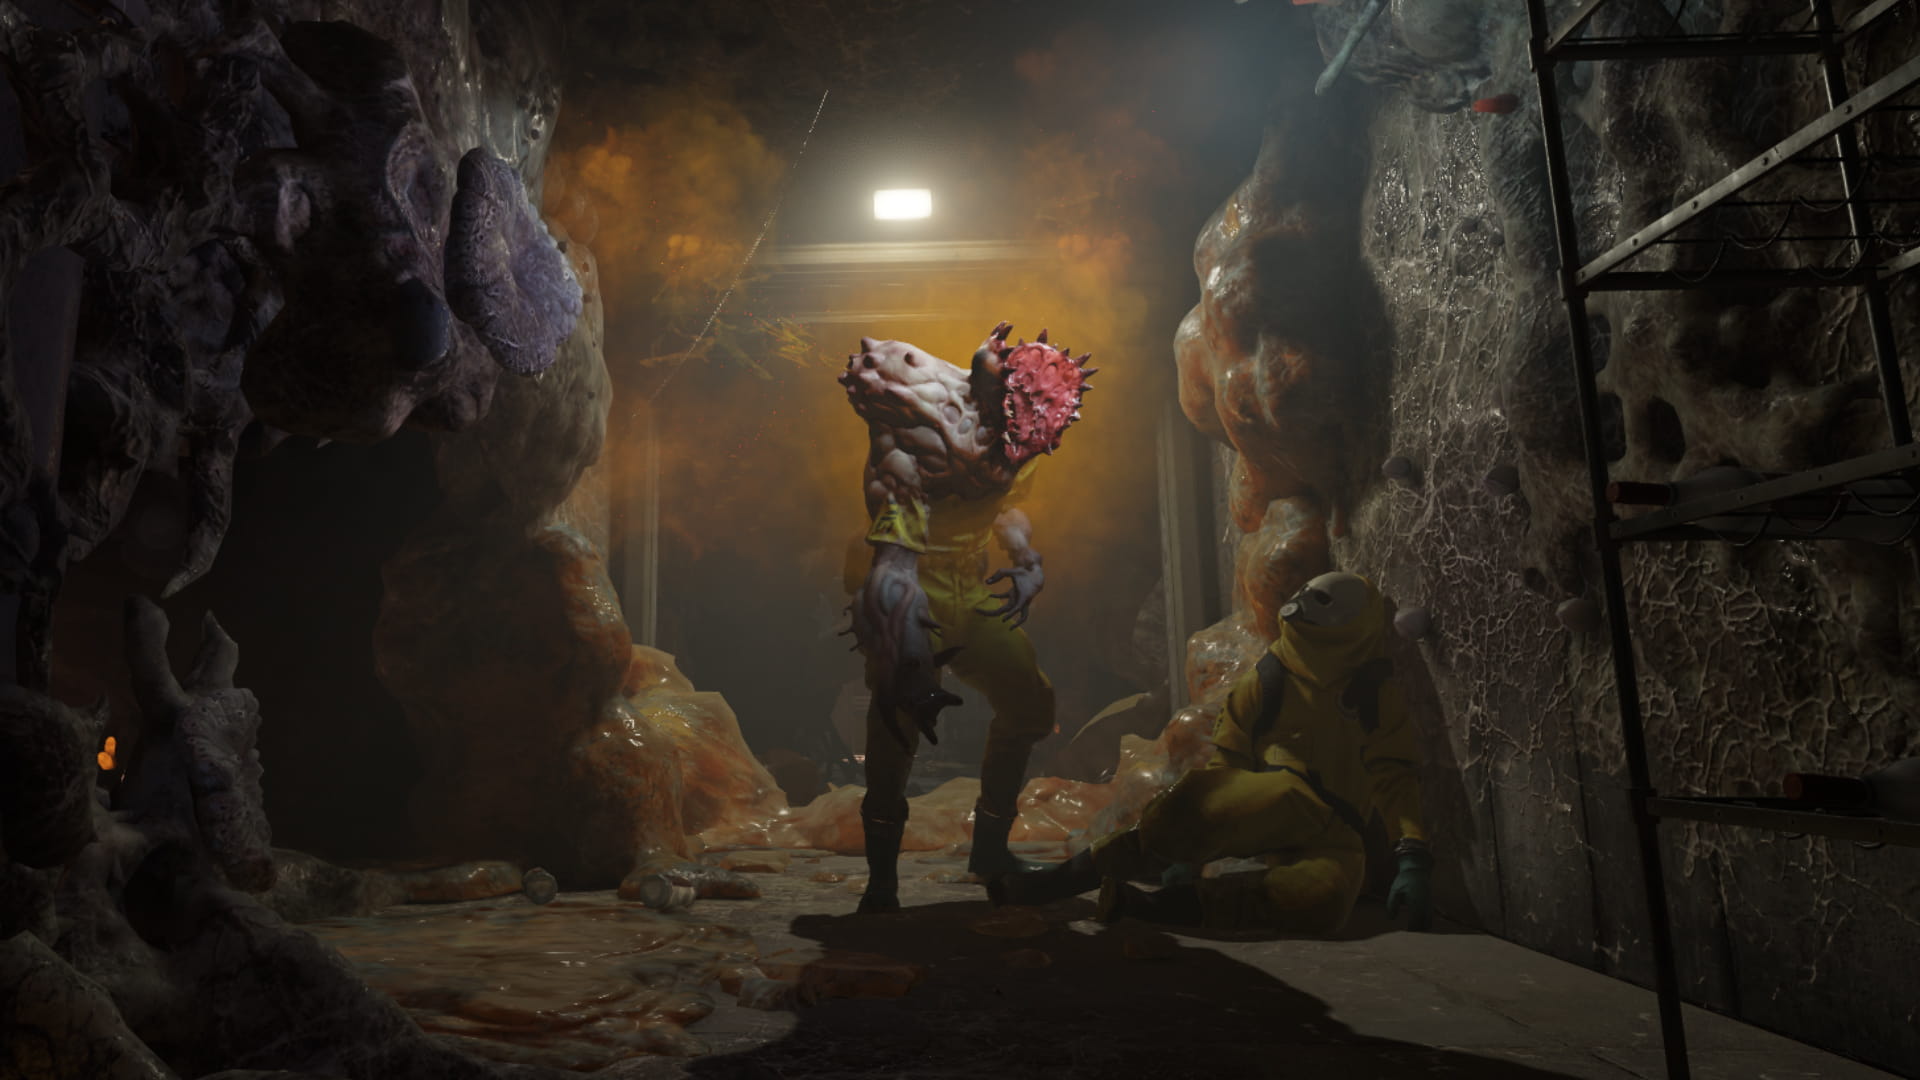 A screenshot of Half-Life: Alyx. Jeff, a mutated creature with a Venus flytrap mouth where a human head used to be, stands in a corridor of the distillery.